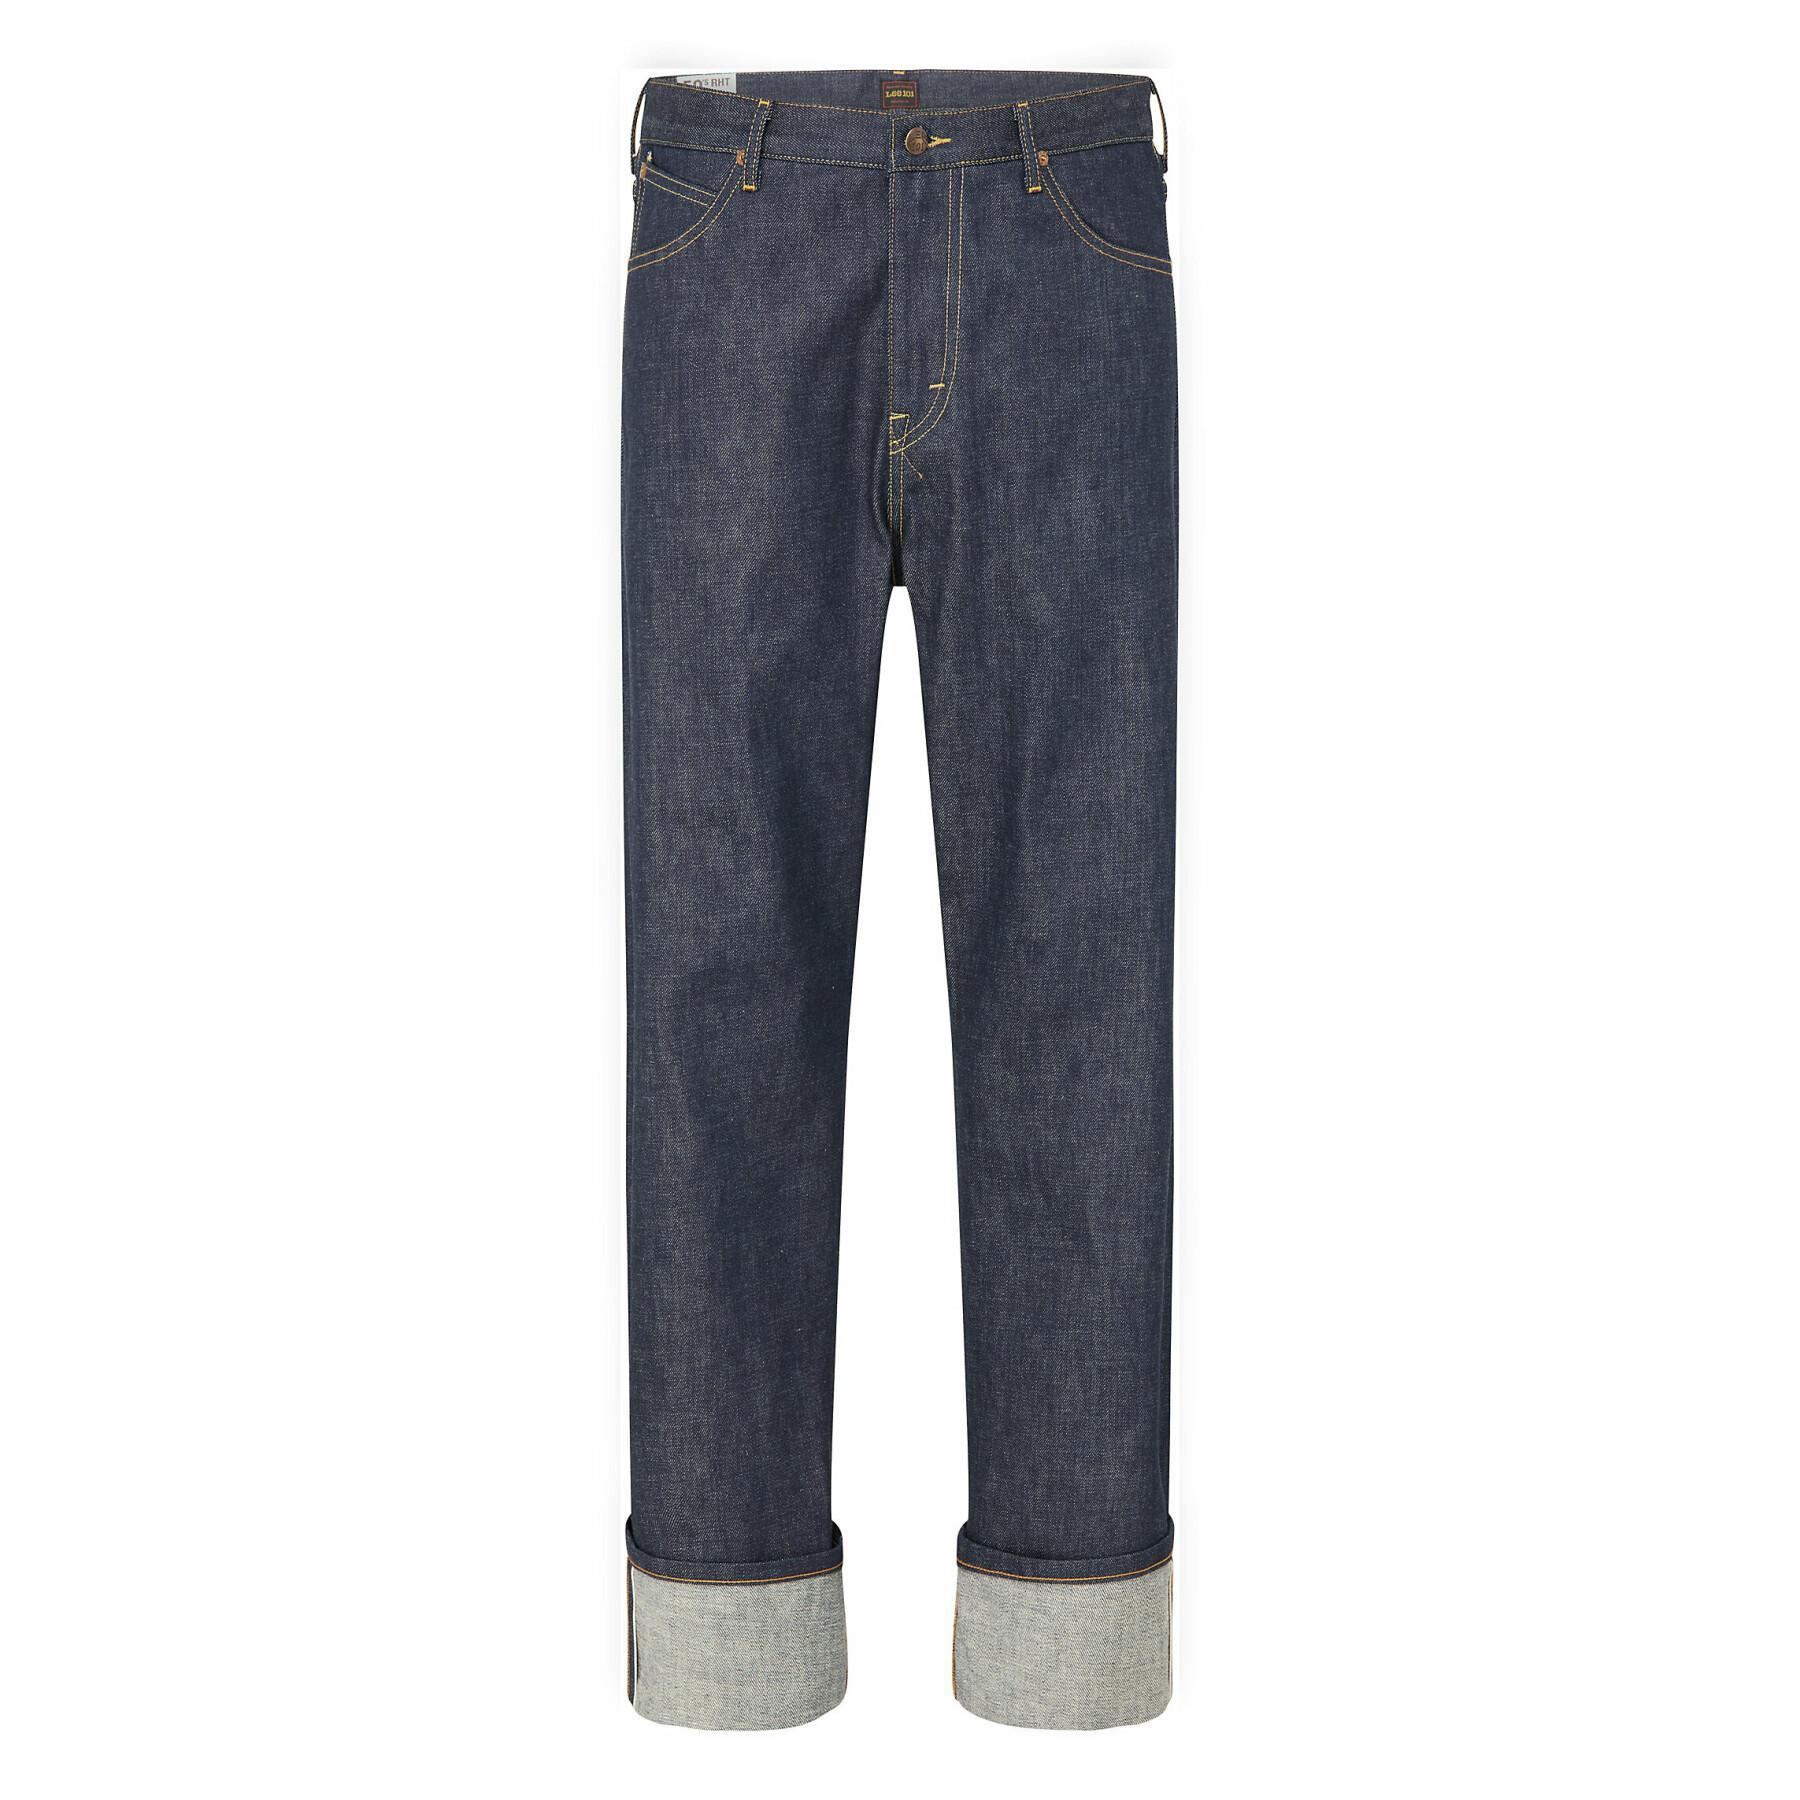 Jeans Lee 101 101 50´S RIDER DRY